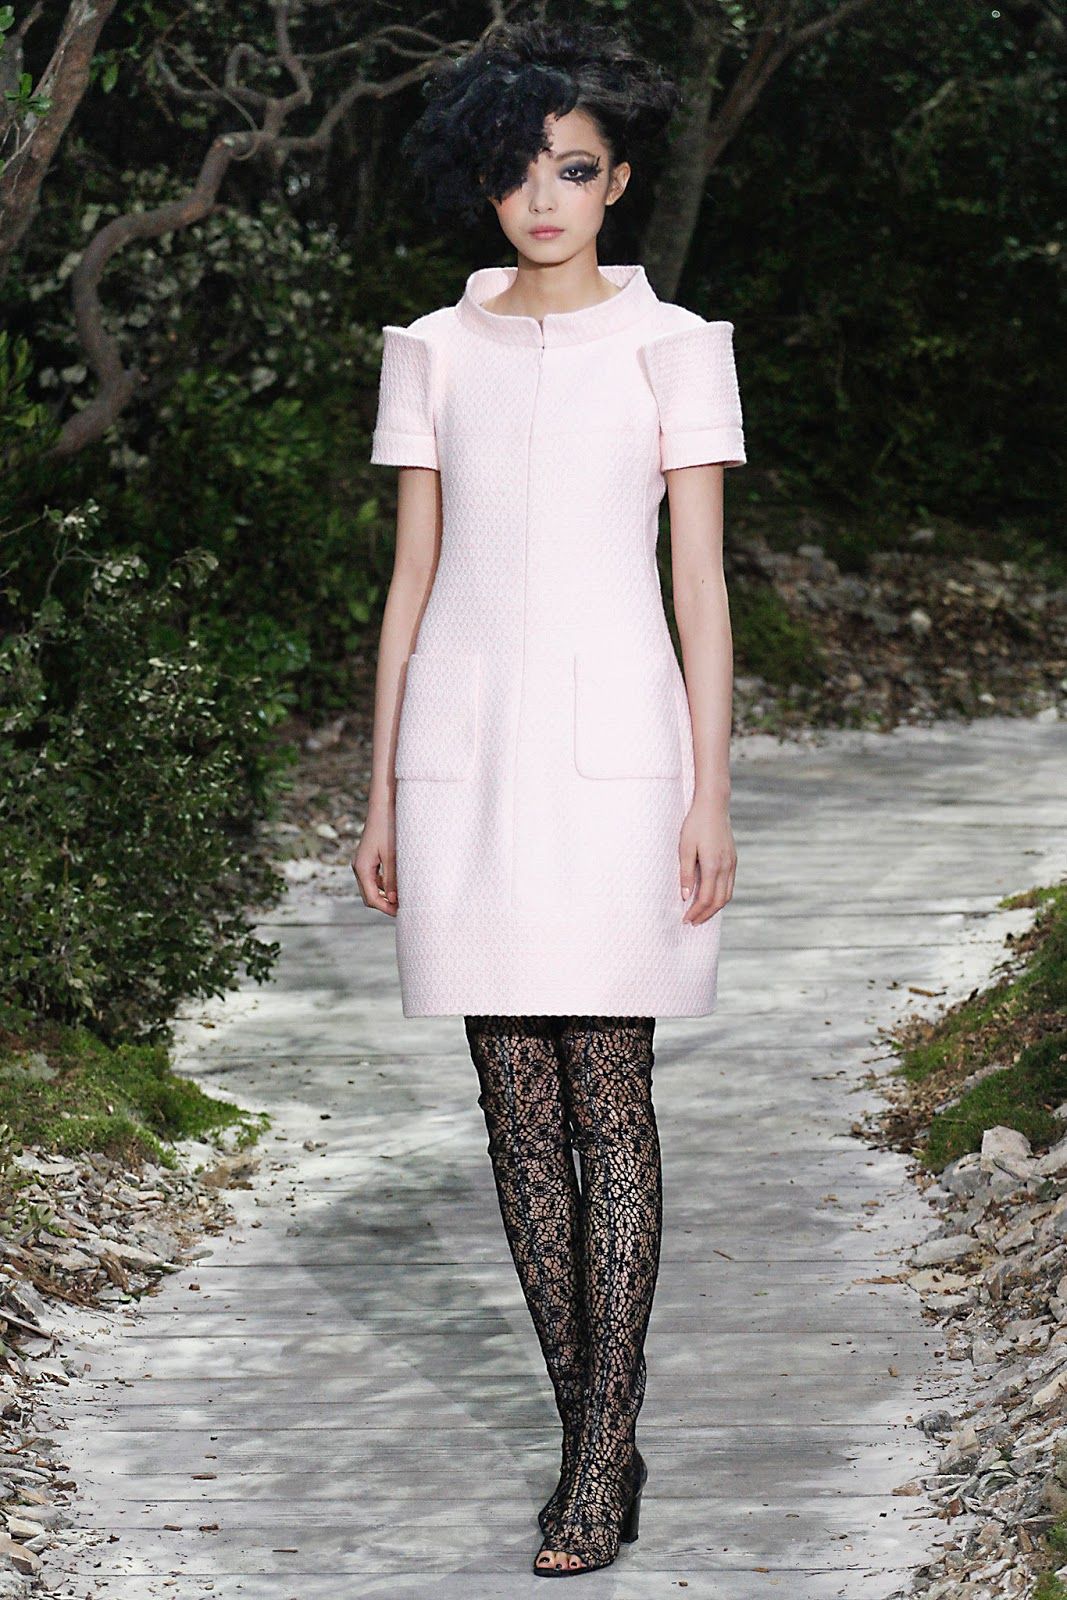 Chanel Haute Couture Spring/Summer 2013 | Fab Fashion Fix